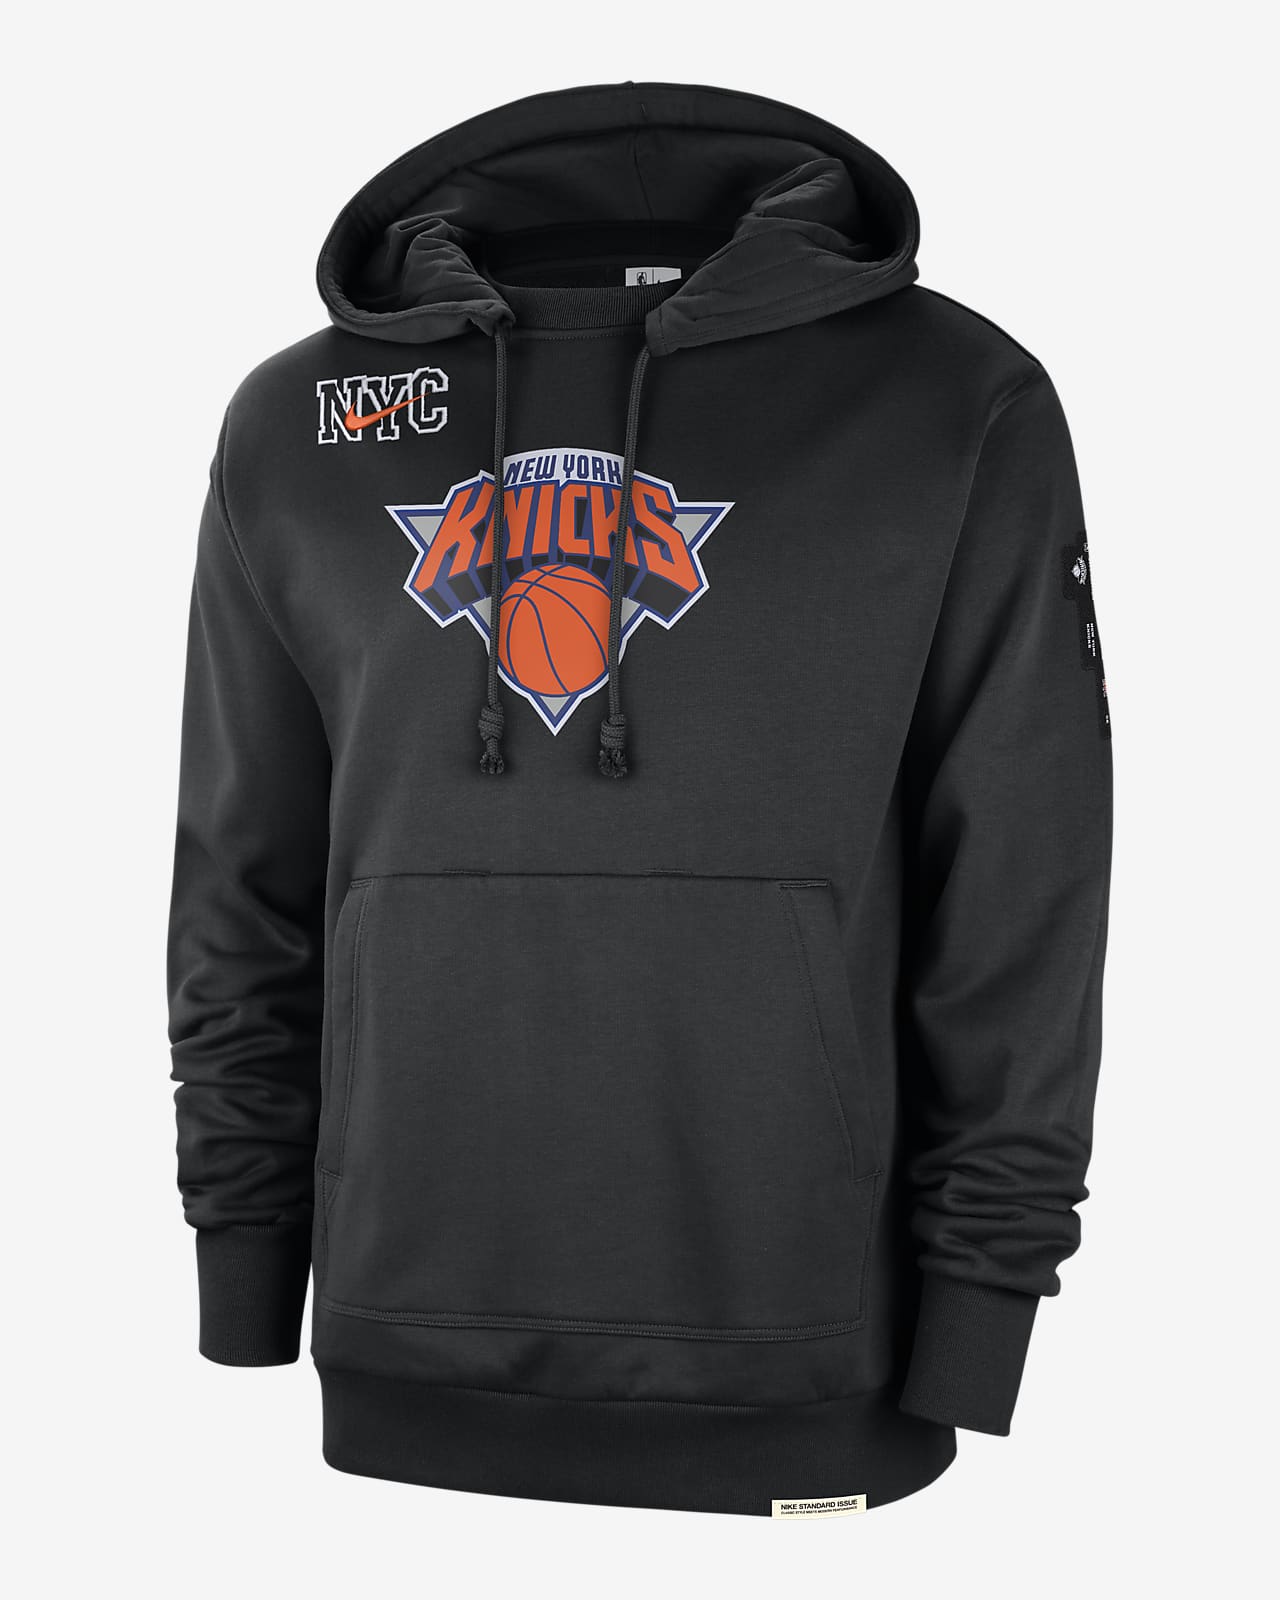 https://static.nike.com/a/images/t_PDP_1280_v1/f_auto,q_auto:eco/e36957e1-4d22-420c-ba2d-71d3302052a3/new-york-knicks-standard-issue-2023-24-city-edition-nba-courtside-hoodie-3dFNTT.png